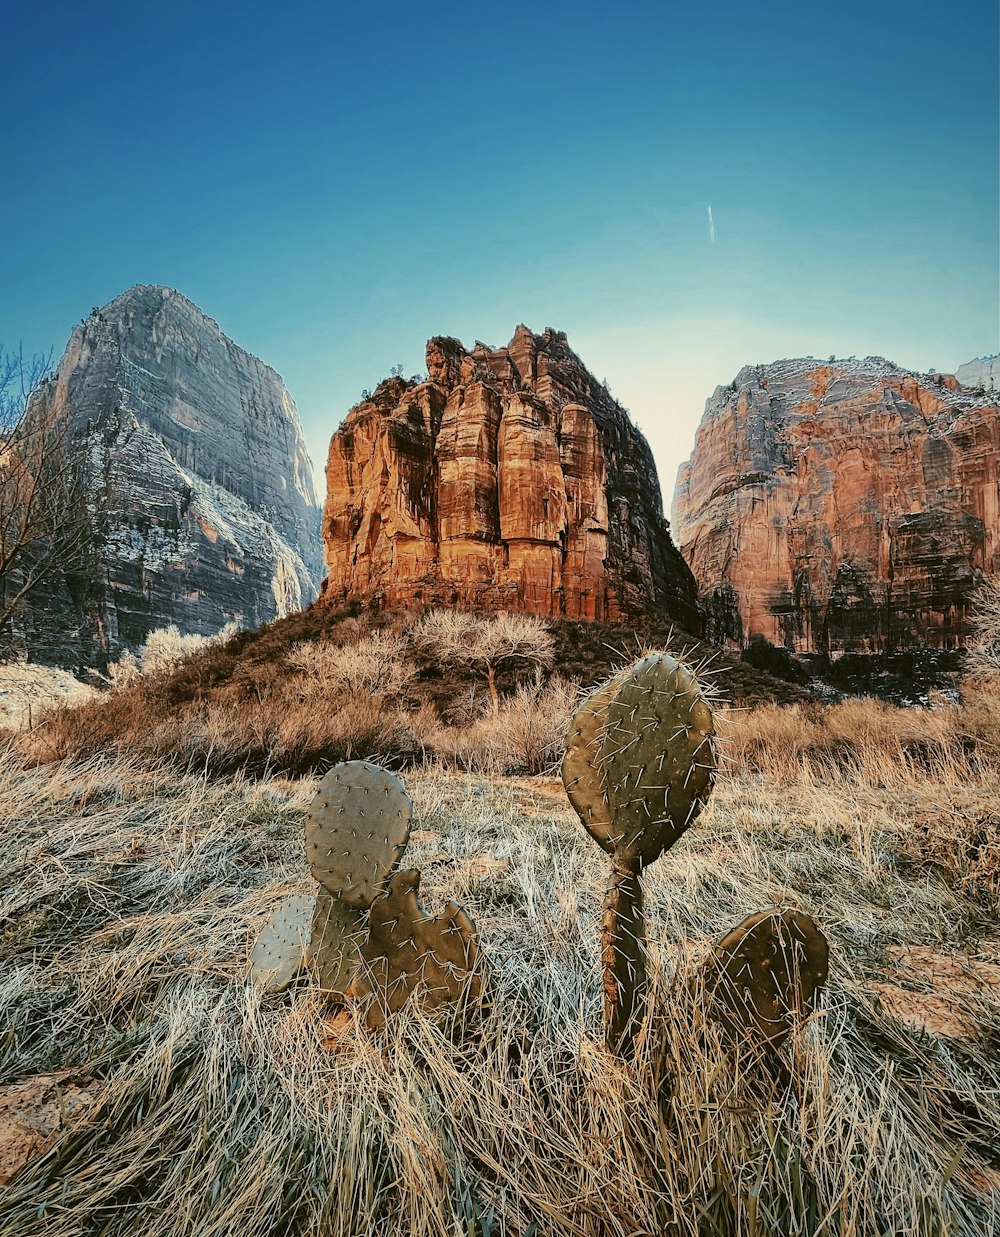 a couple of rocks sitting on top of a dry grass field